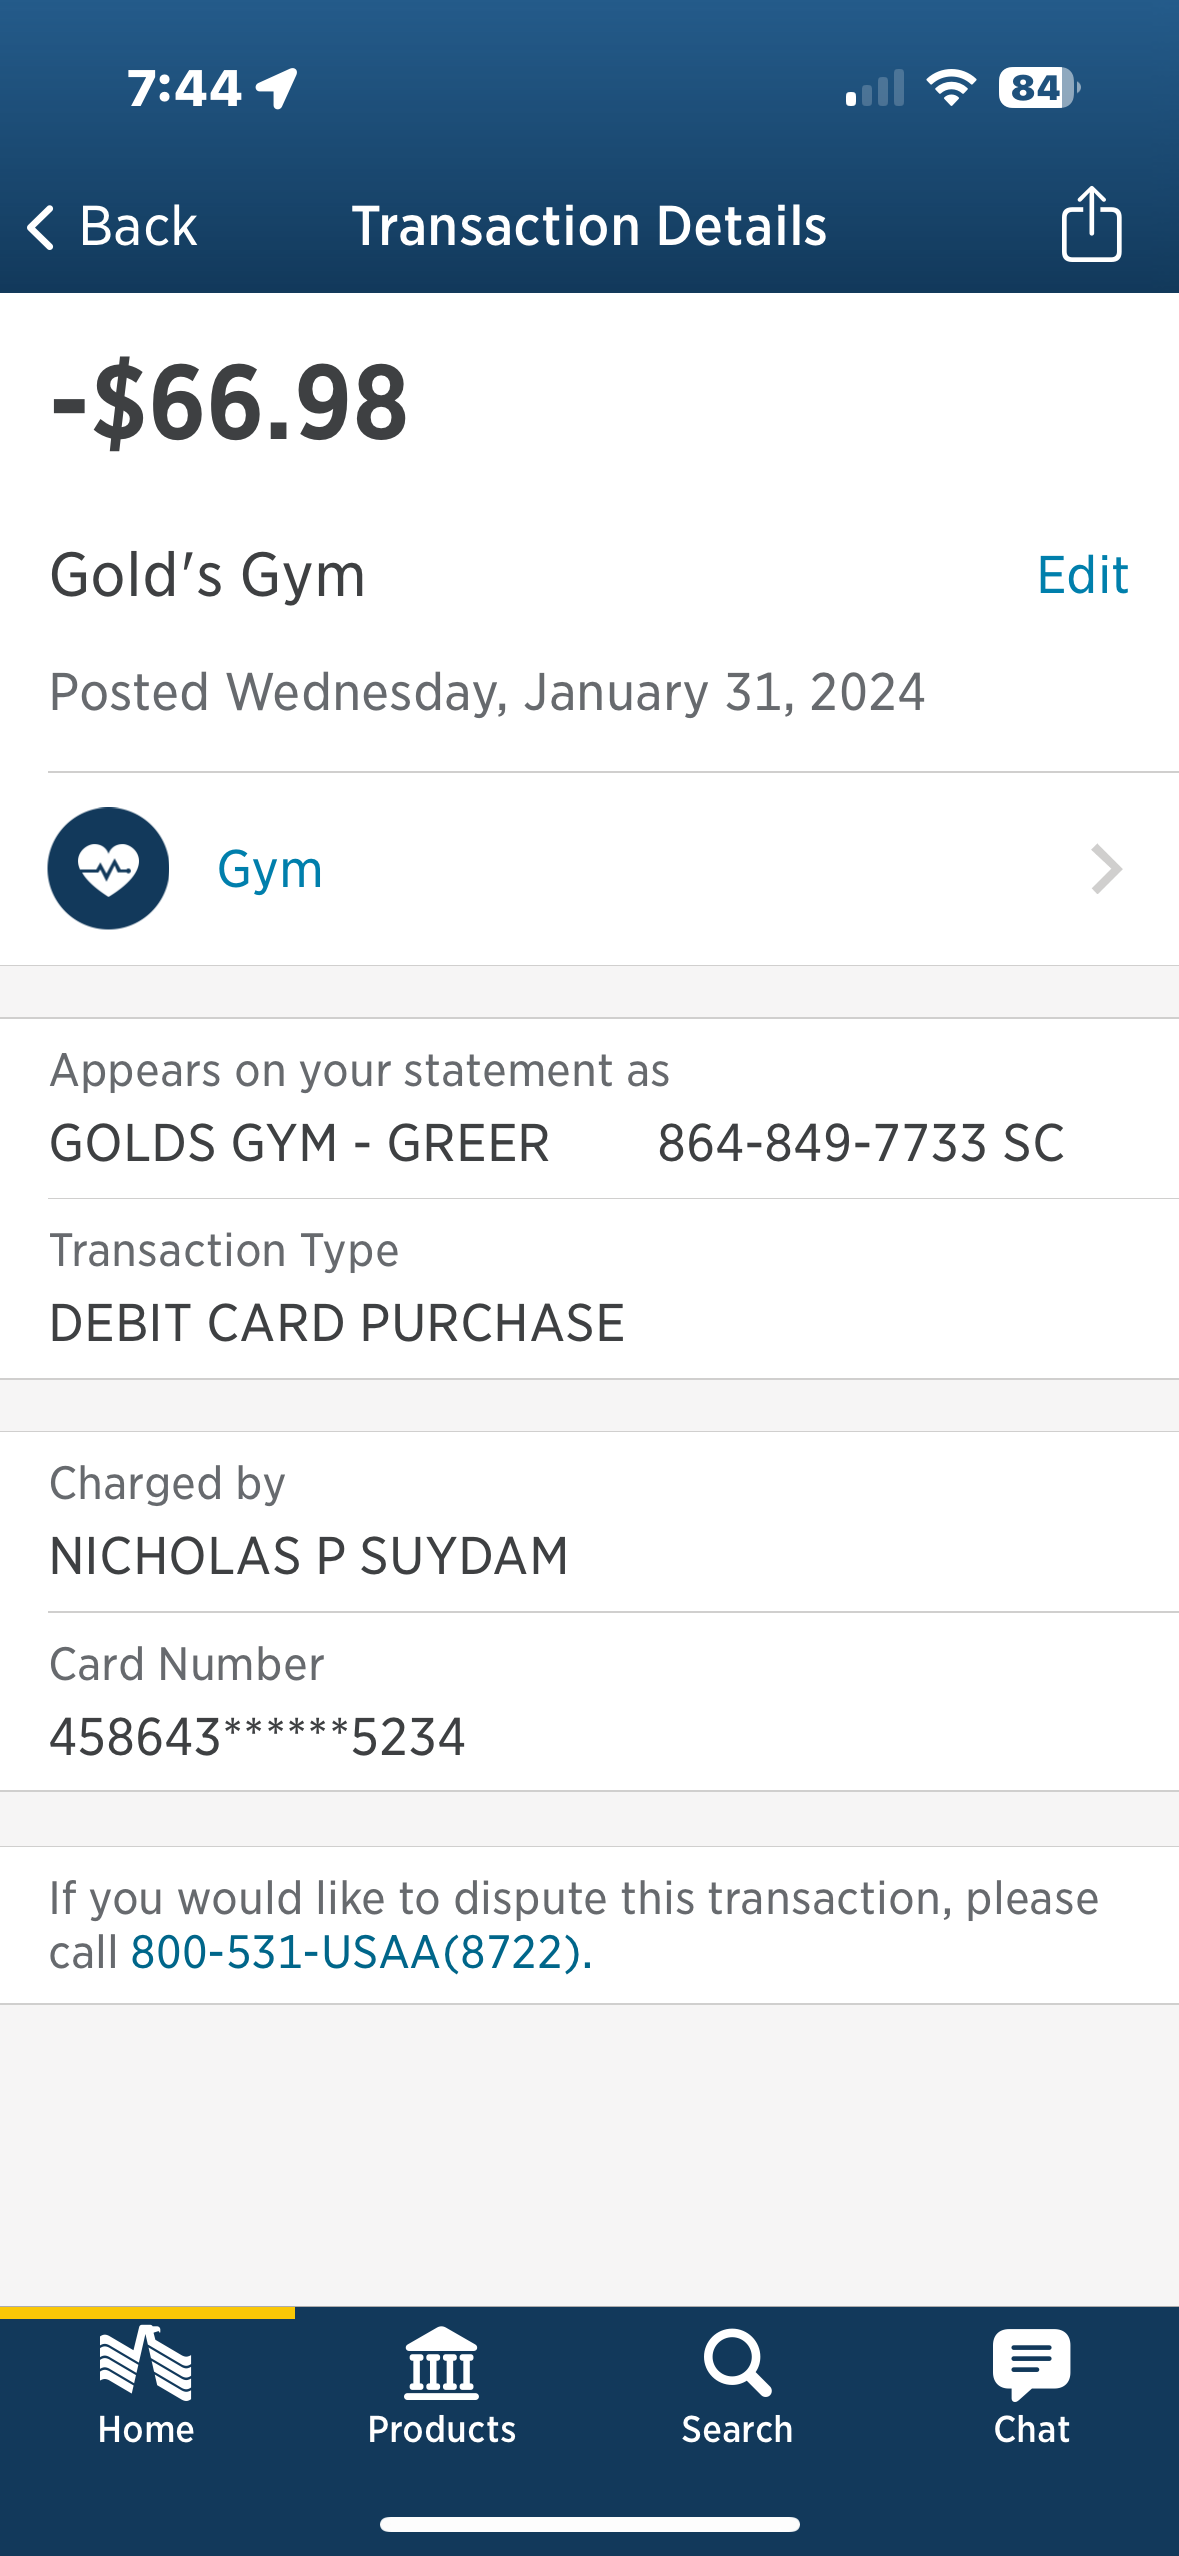 Payment confirmation